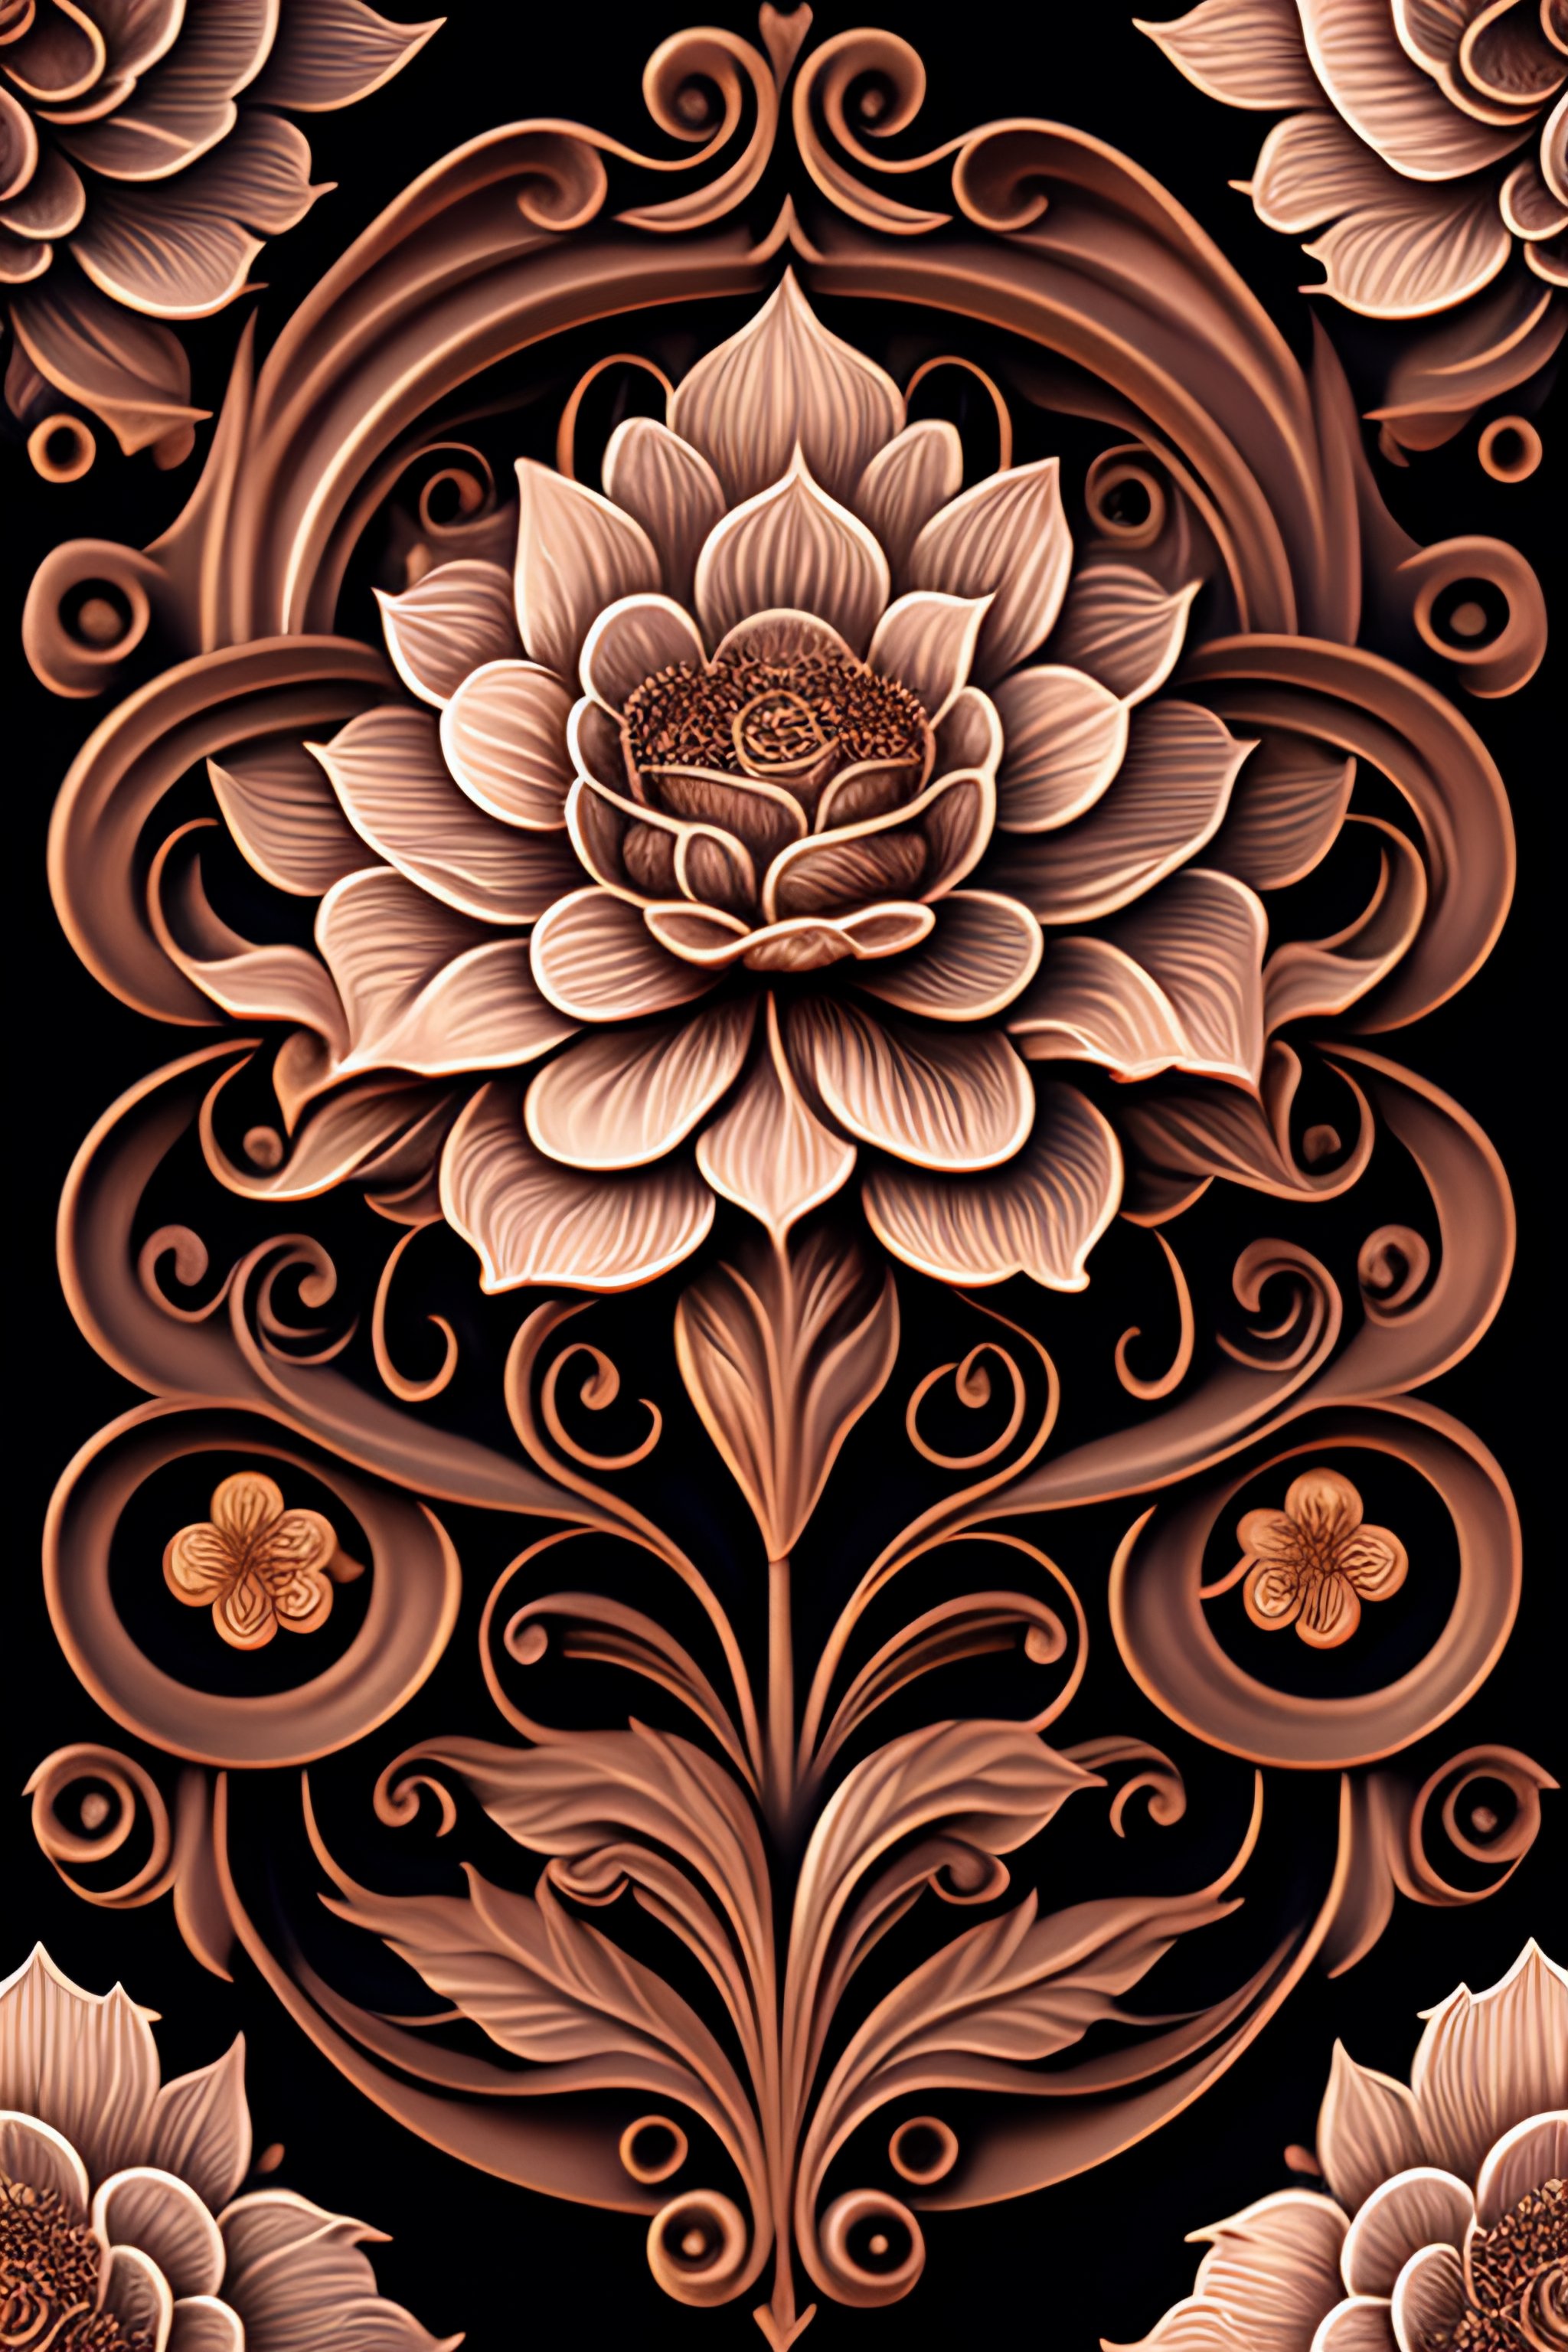 Lexica Classical Floral Elements Emanating From Center Woodcutting